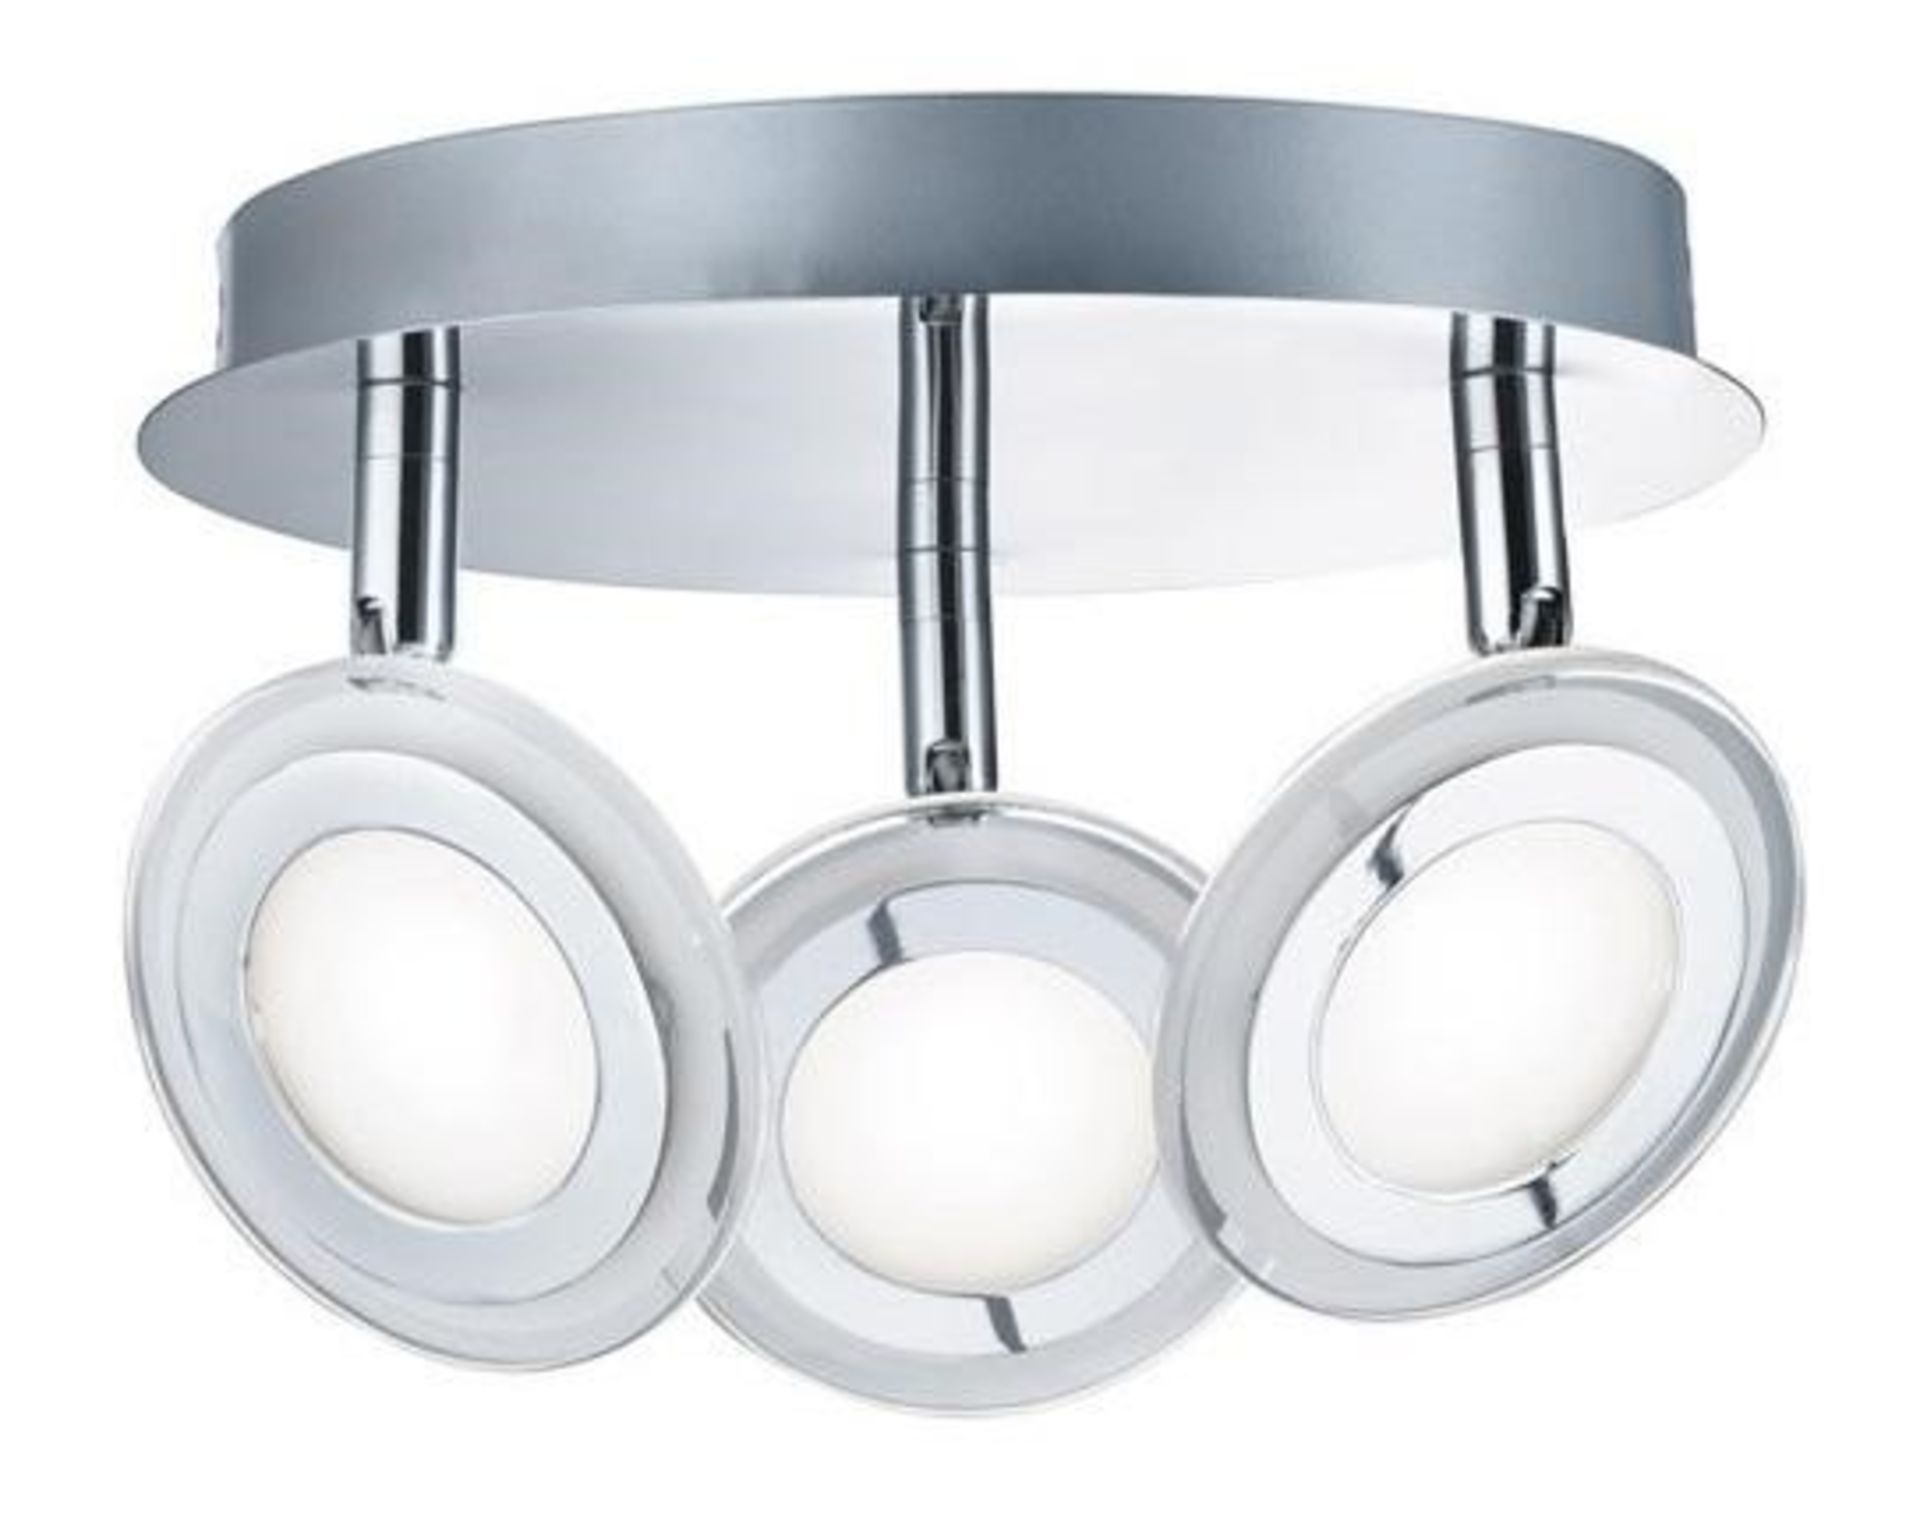 1 x Frenzy Chrome Frosted LED Ceiling Spotlight - Ex Display Stock - CL298 - Ref: J149 - Location: A